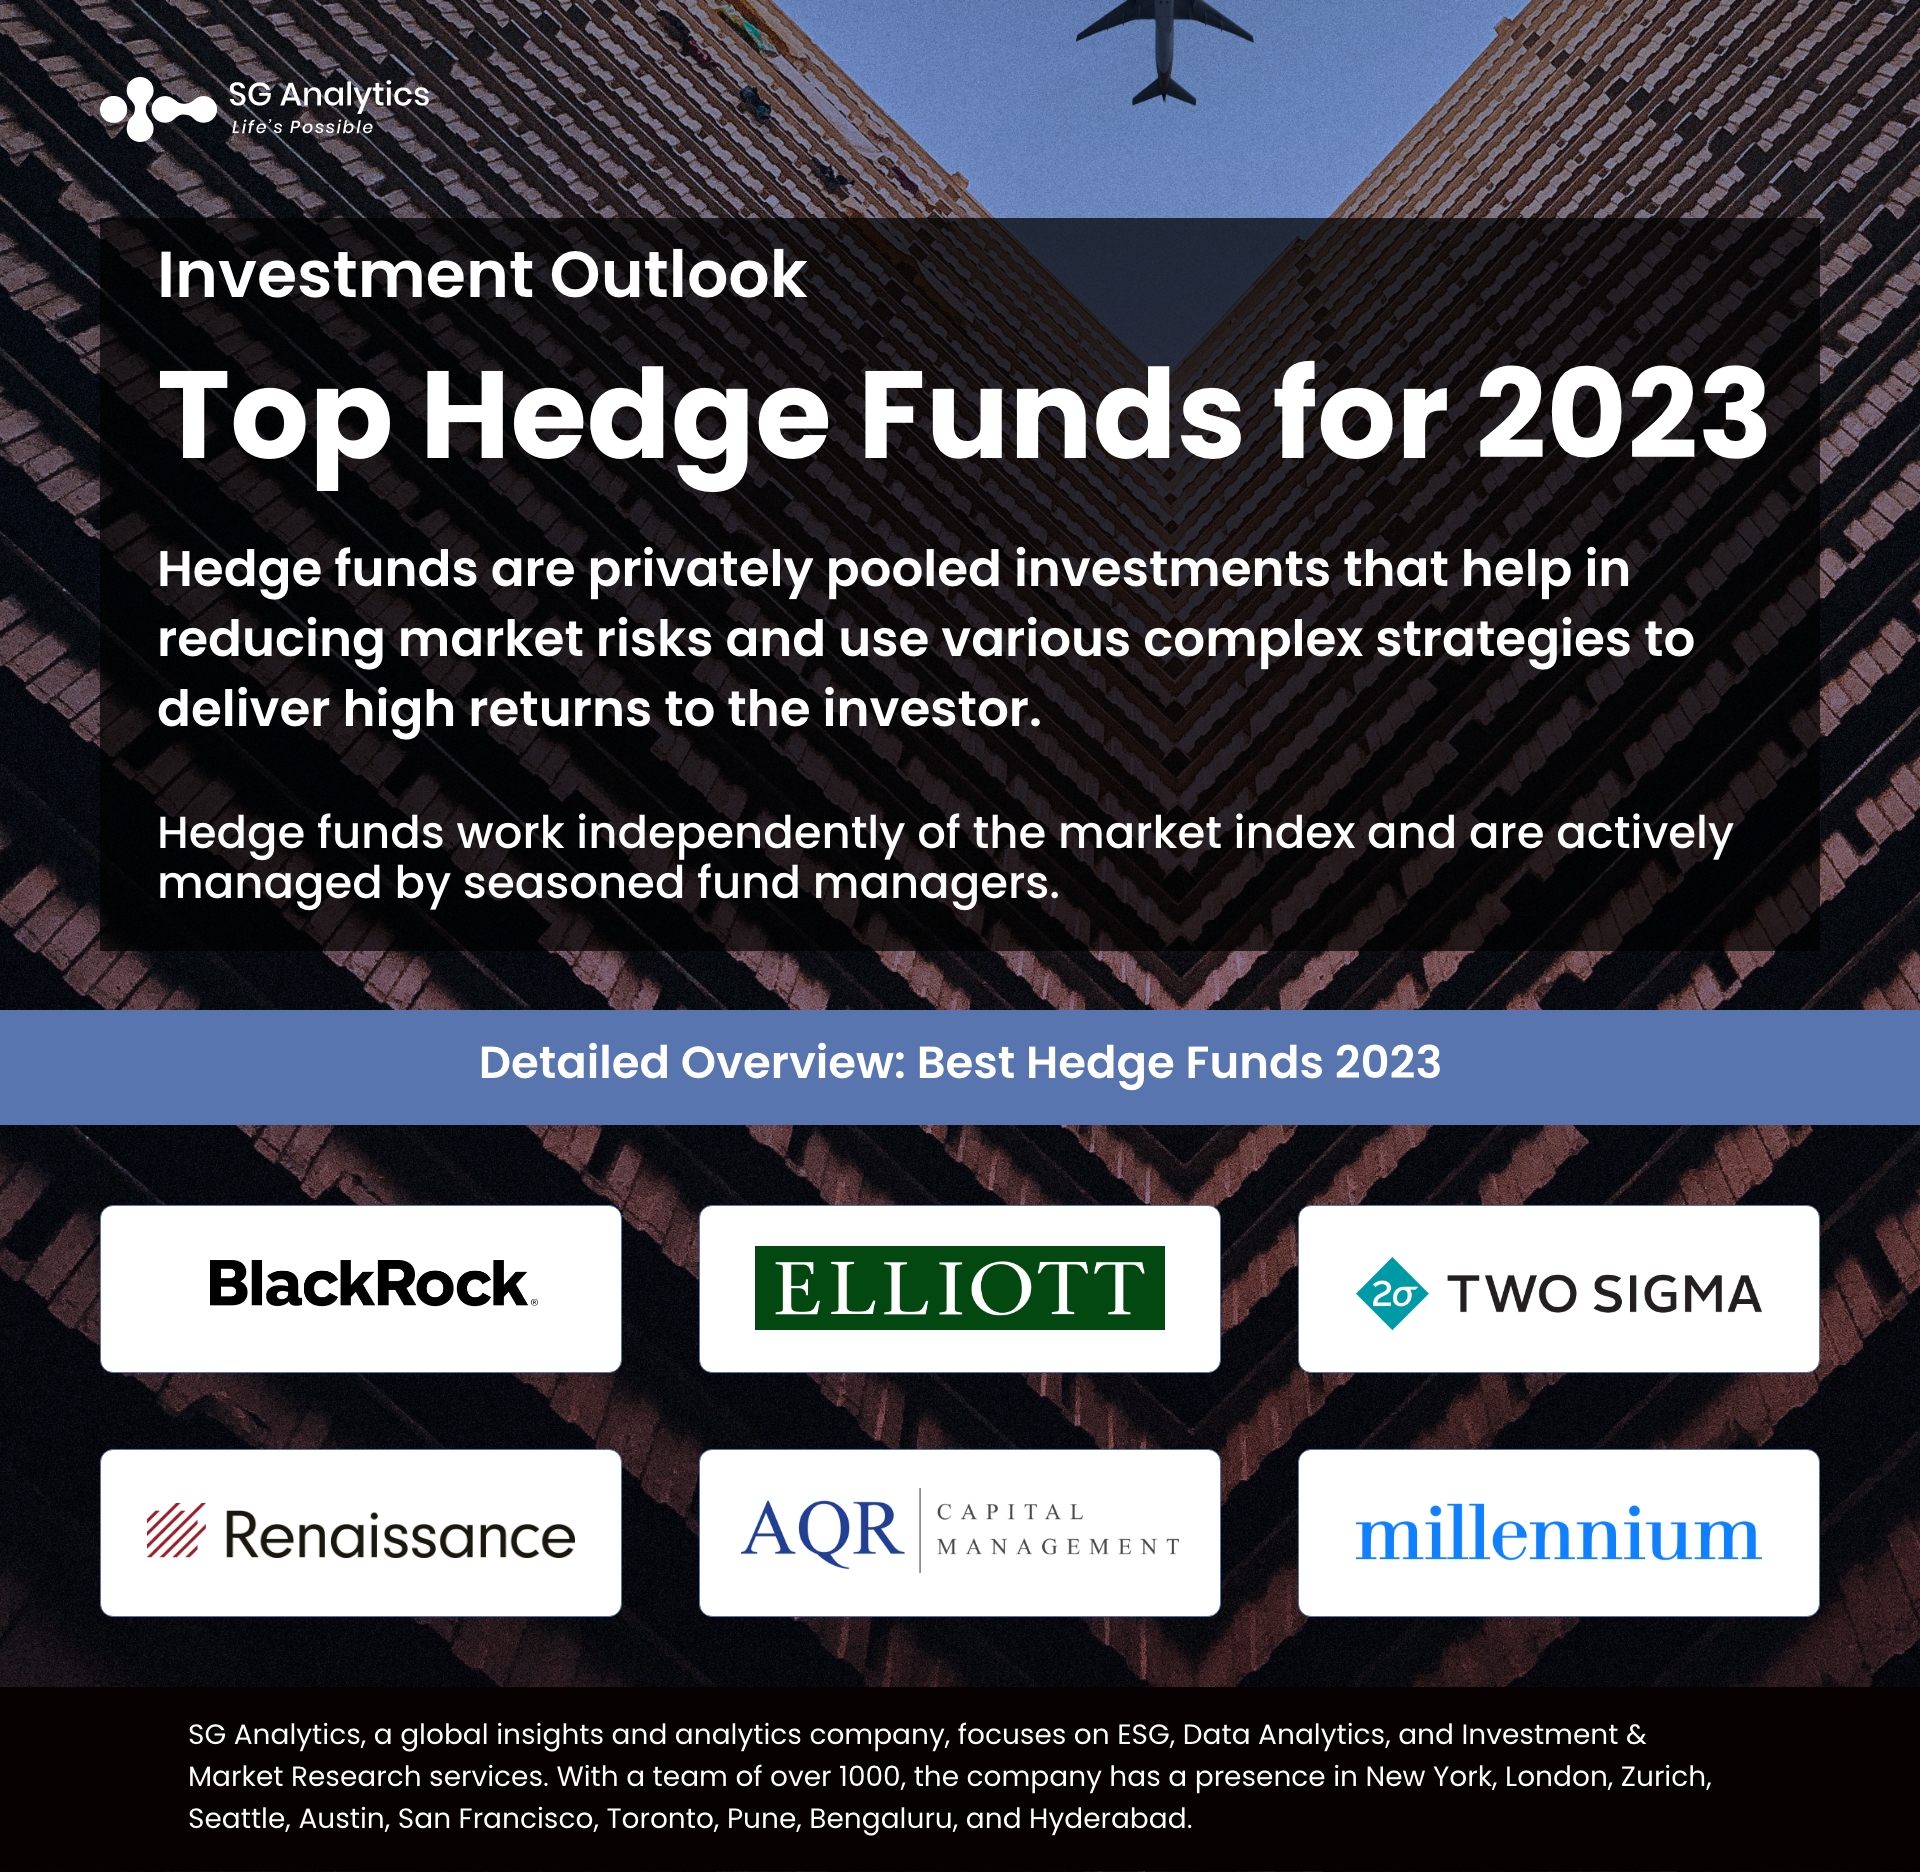 Top Hedge Funds for 2023